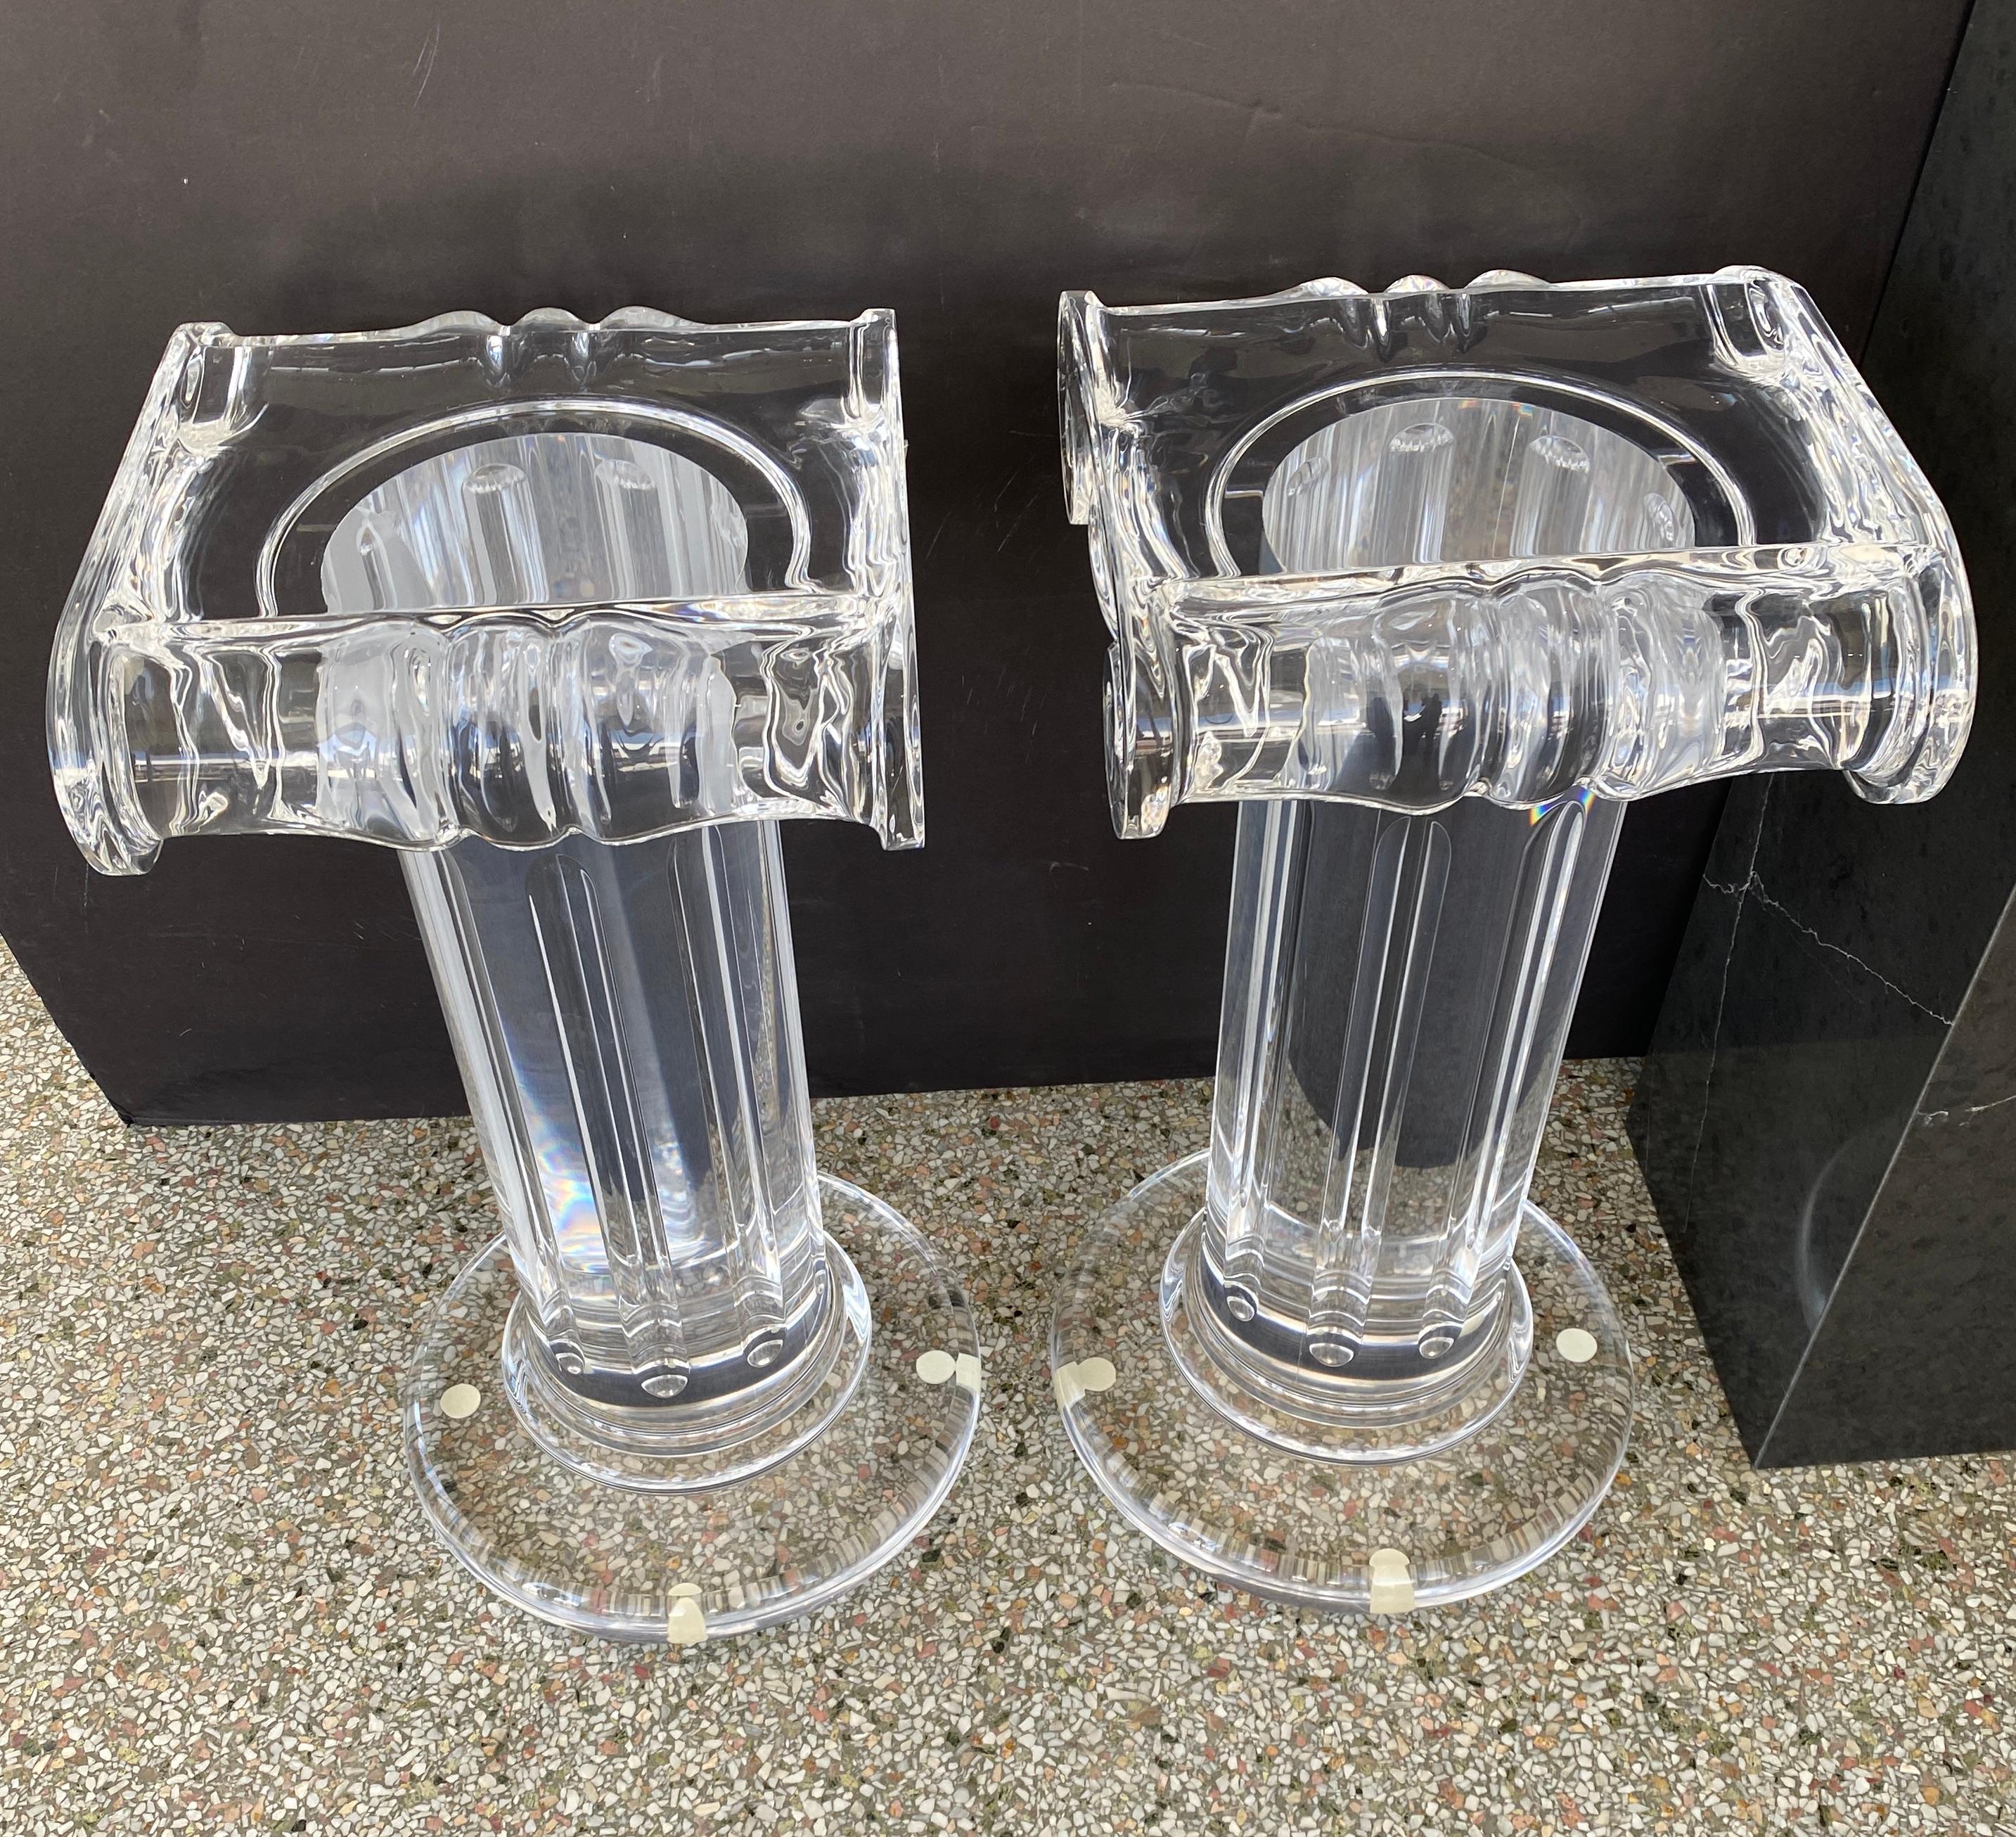 This stylish and chic pair of lucite pedestals with fluted columns and doric capitals can be used to display a piece of sculpture, or perhaps as a base to a console or dining table.

Note: We have had the pieces professionally polished.